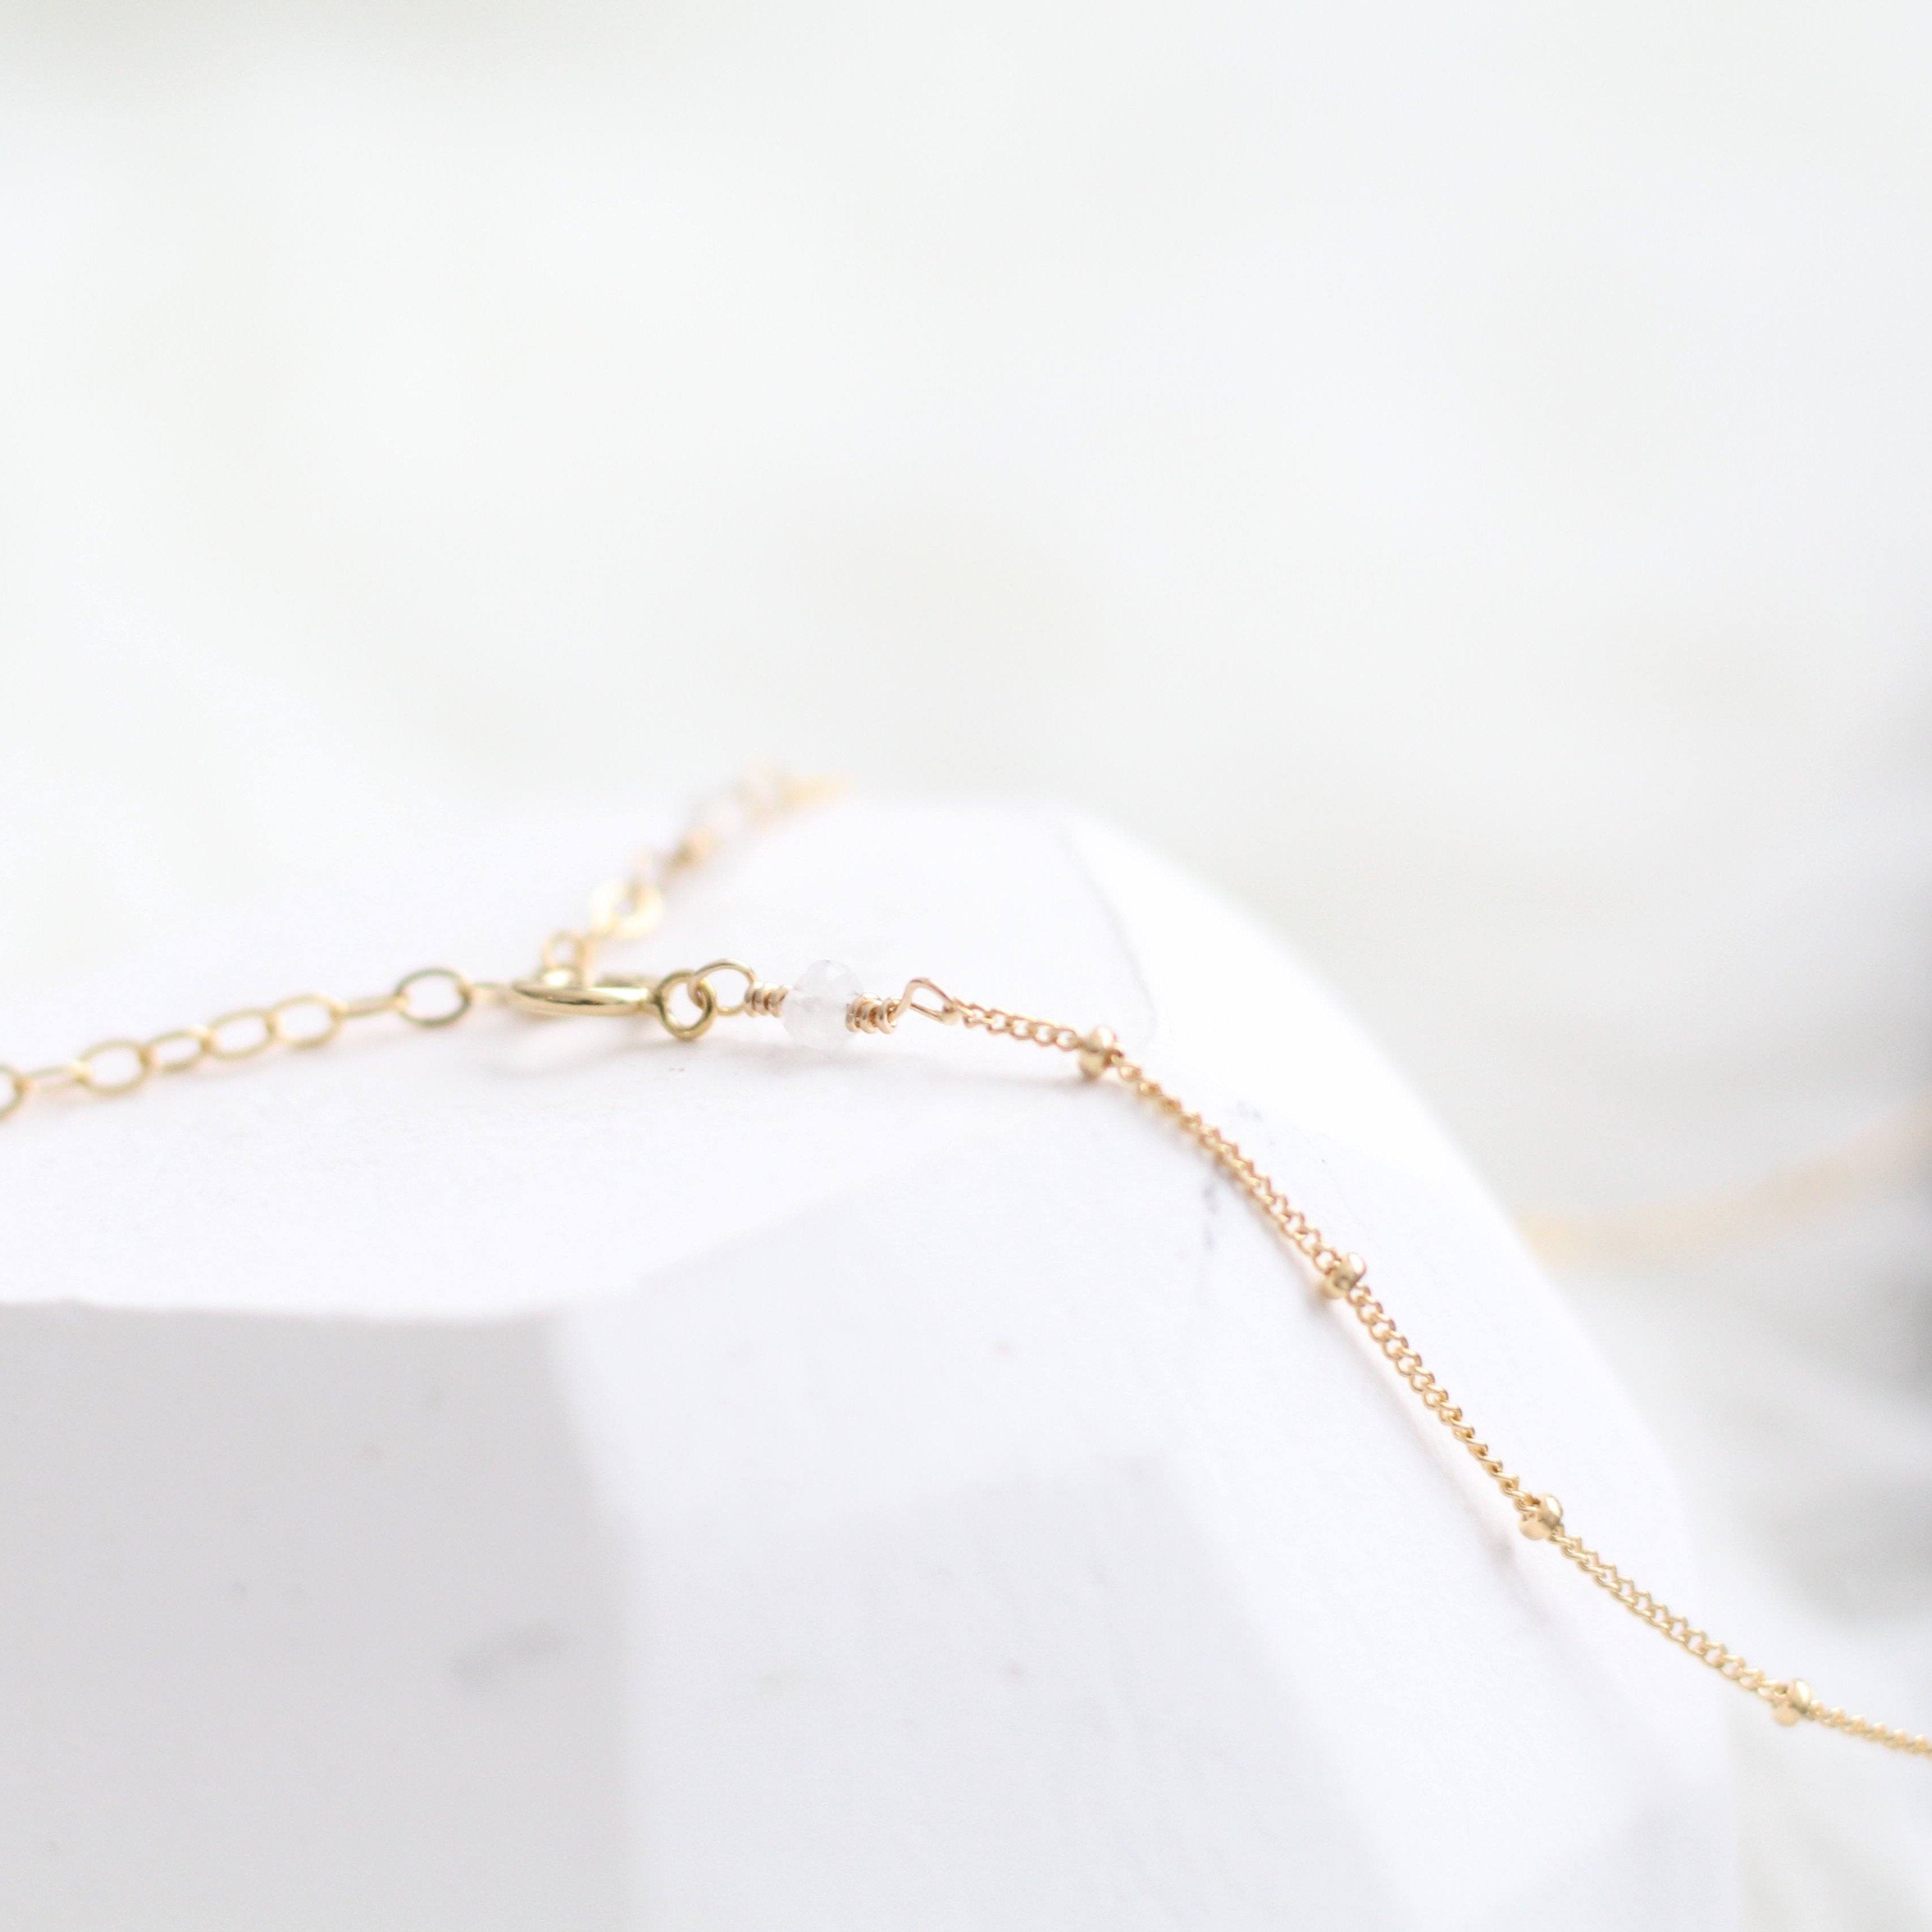 Handmade minimal gold choker necklace sustainably made in Canada